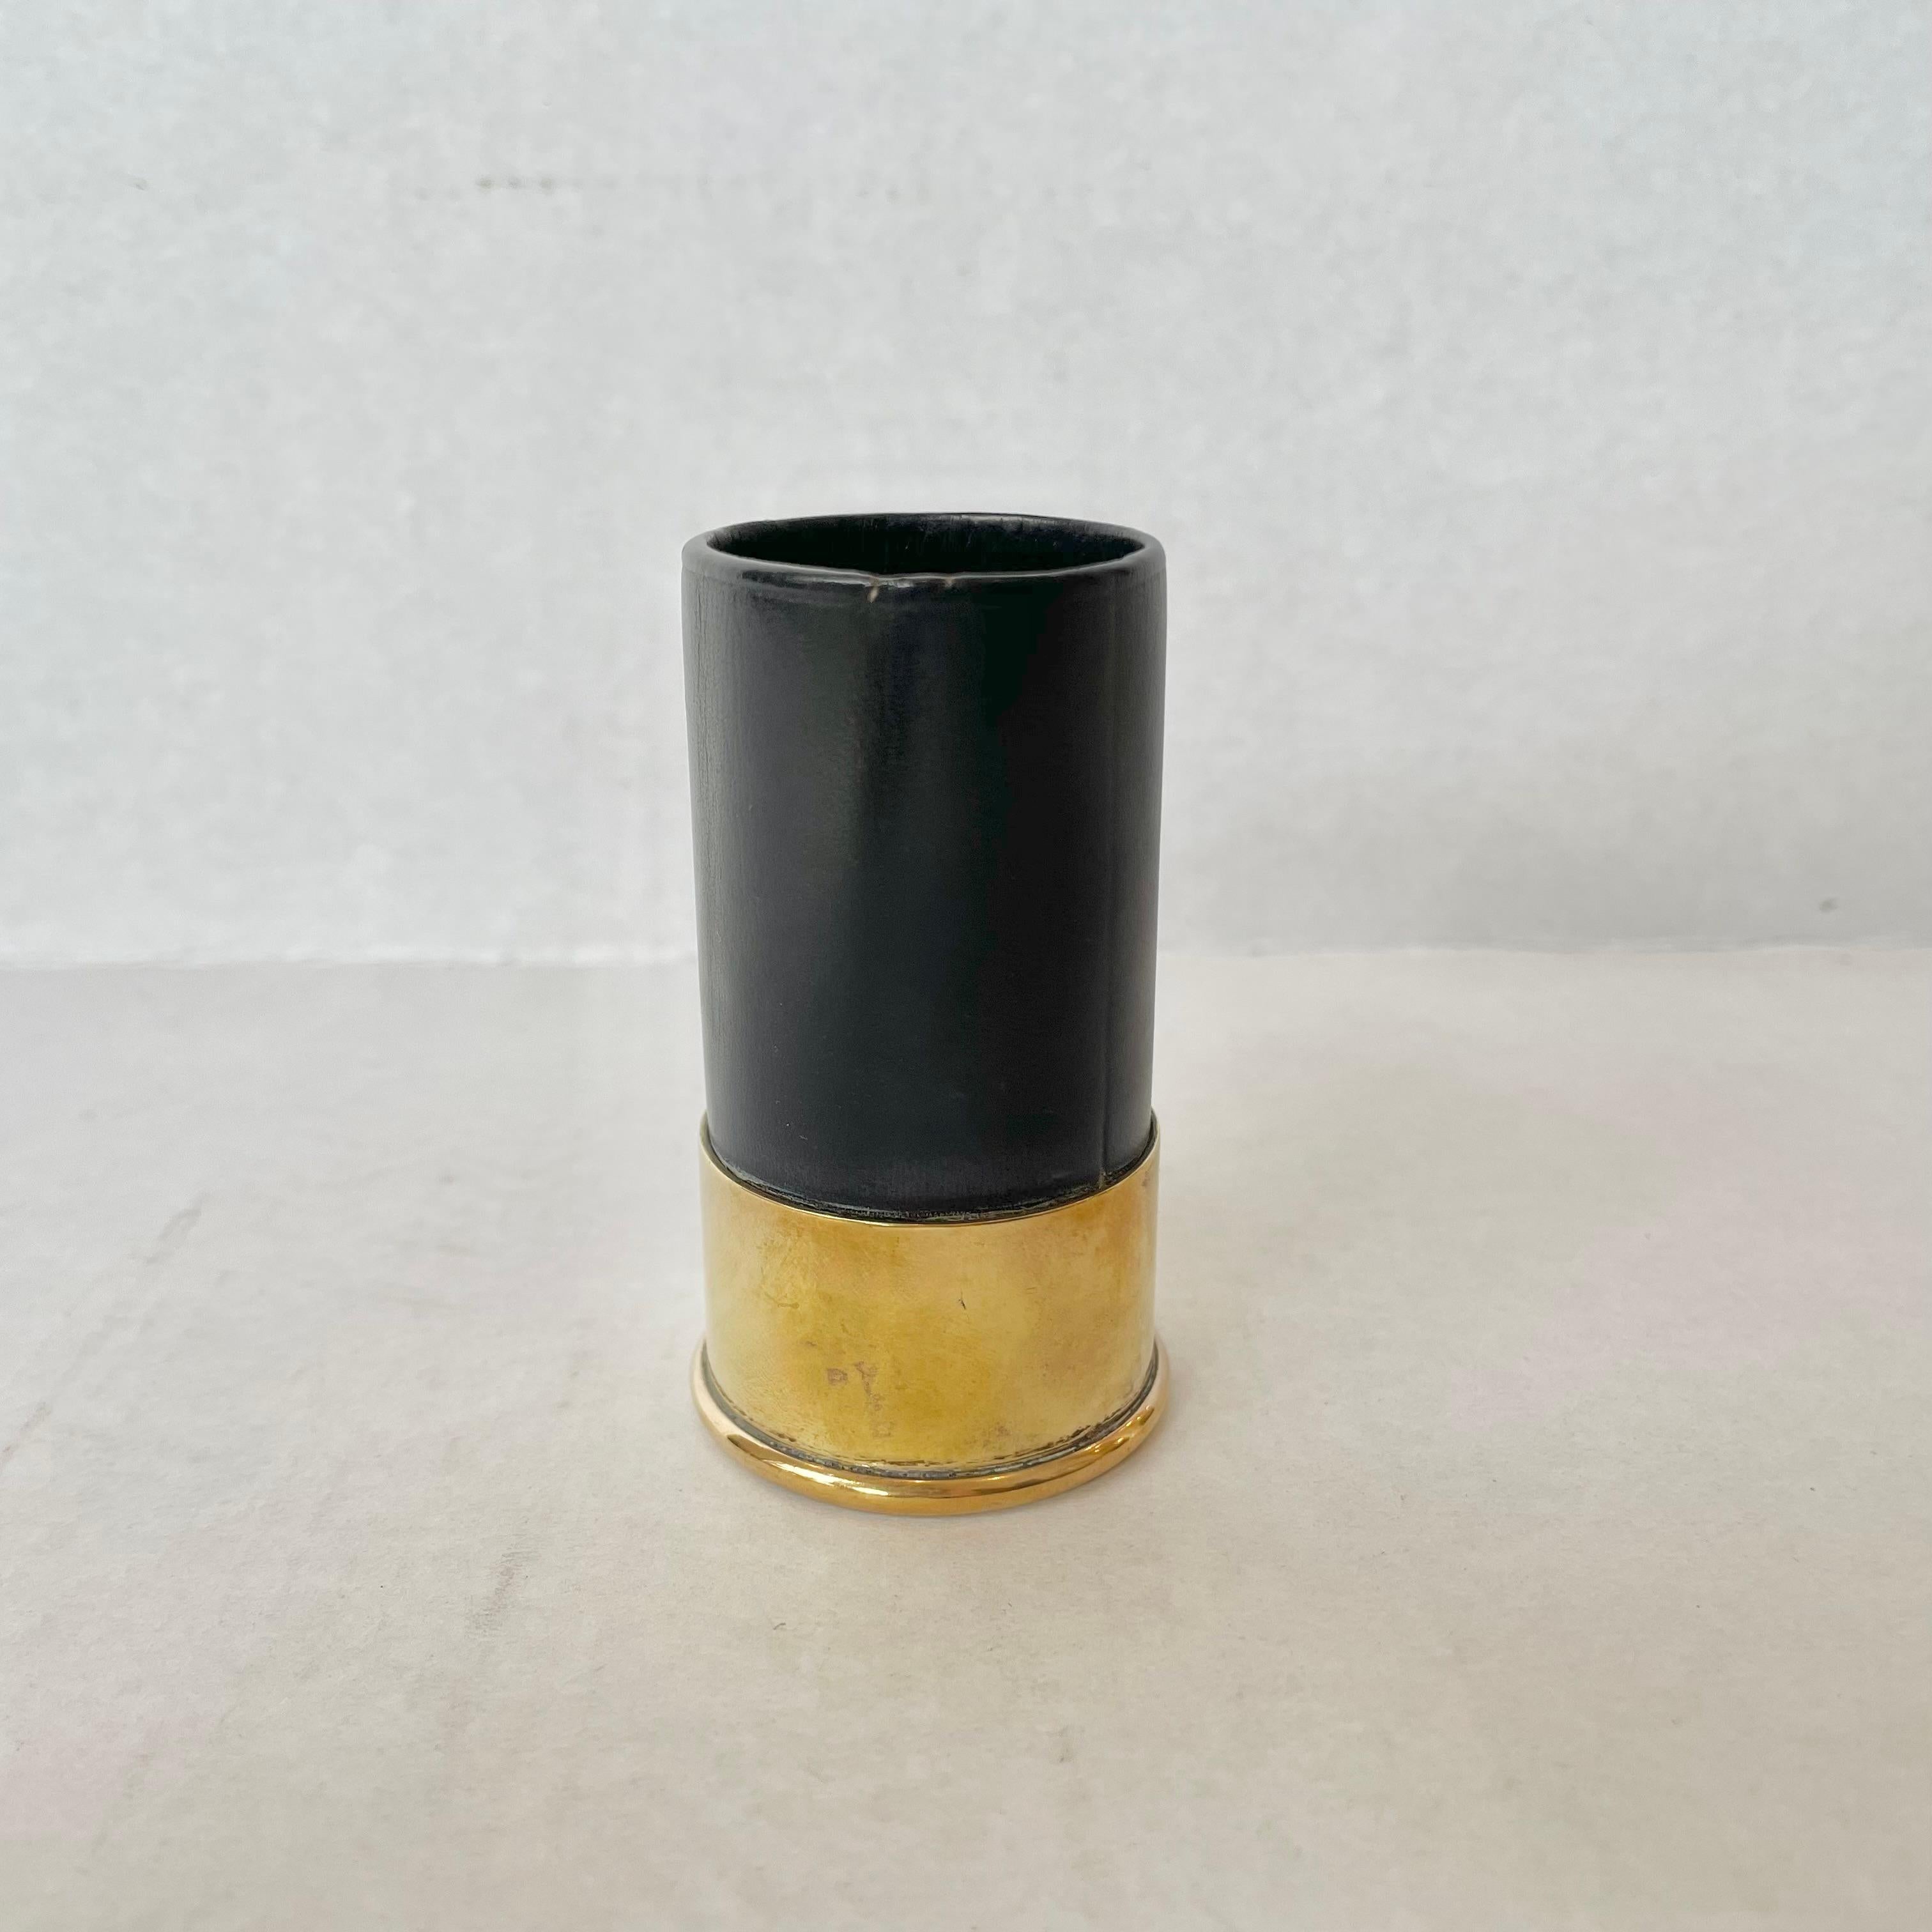 Classic leather cup with brass bottom made by Hermès. In the shape/style of a shotgun shell. Stamped Hermès Made in France on underside of brass. Good vintage condition. Great desktop item with functionality and fun design. Fun piece of collectible